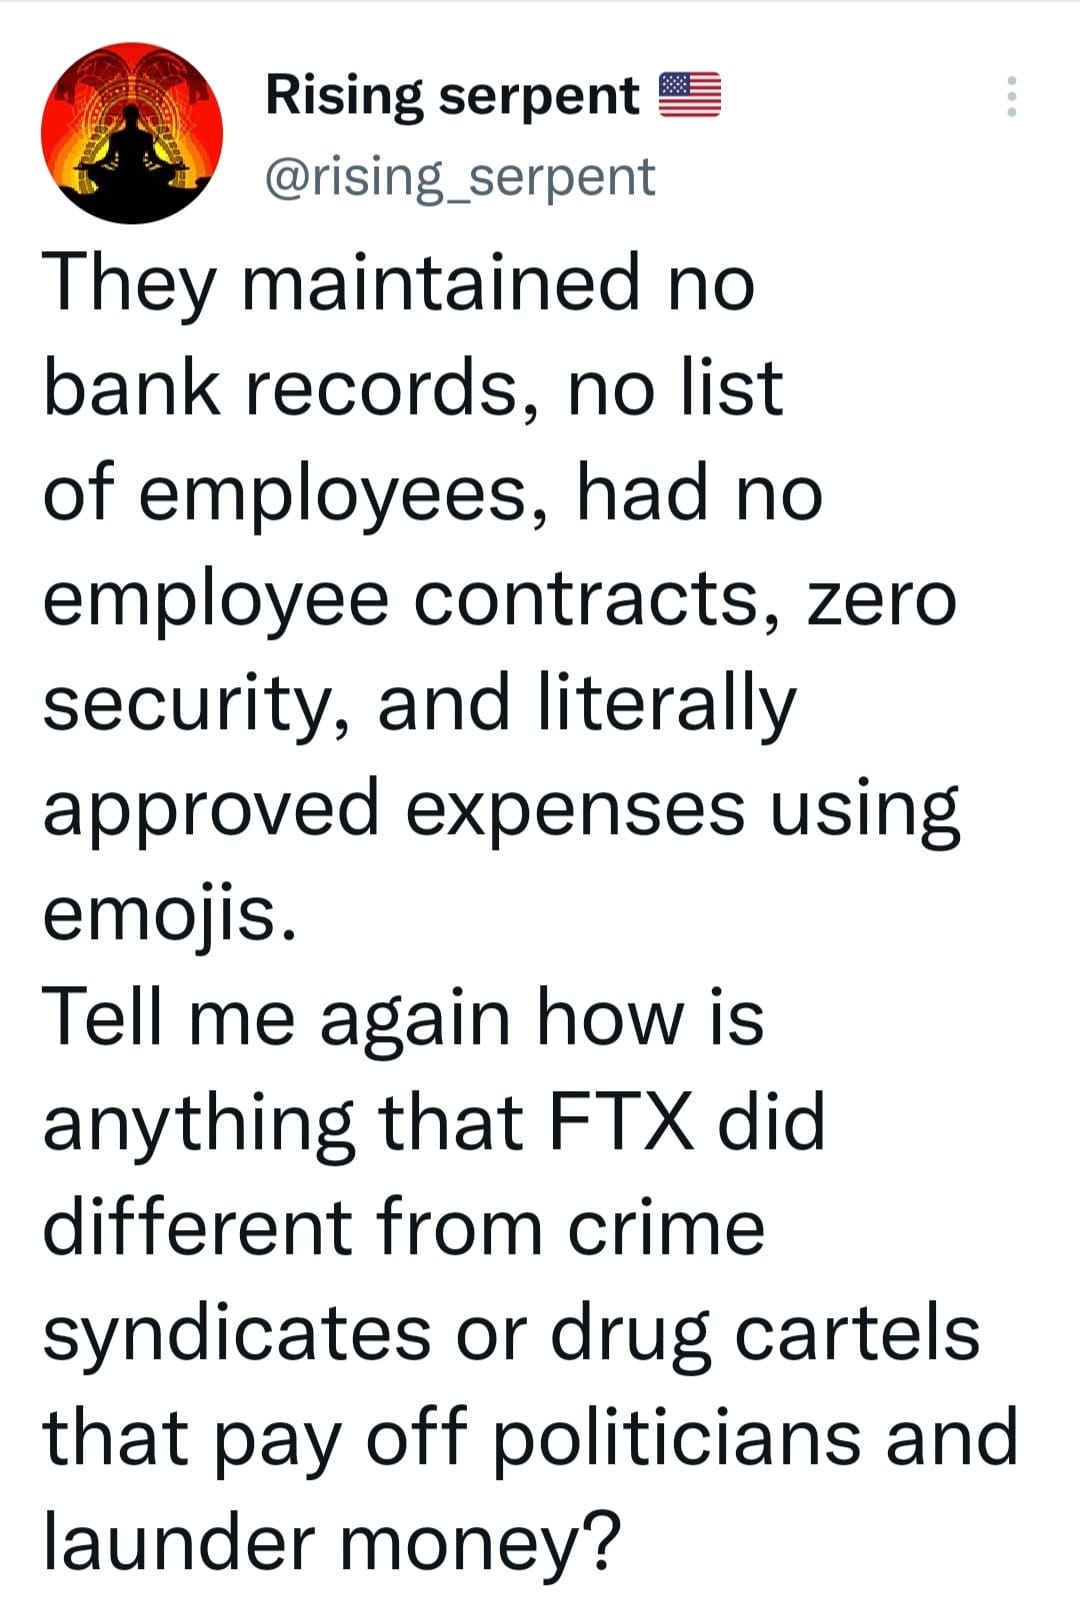 May be an image of text that says 'Ûising serpent @rising_serpent They maintained no bank records, no list of employees, had no employee contracts, zero security, and literally approved expenses using emojis. Tell me again how is anything that FTX did different from crime syndicates or drug cartels that pay off politicians and launder money?'